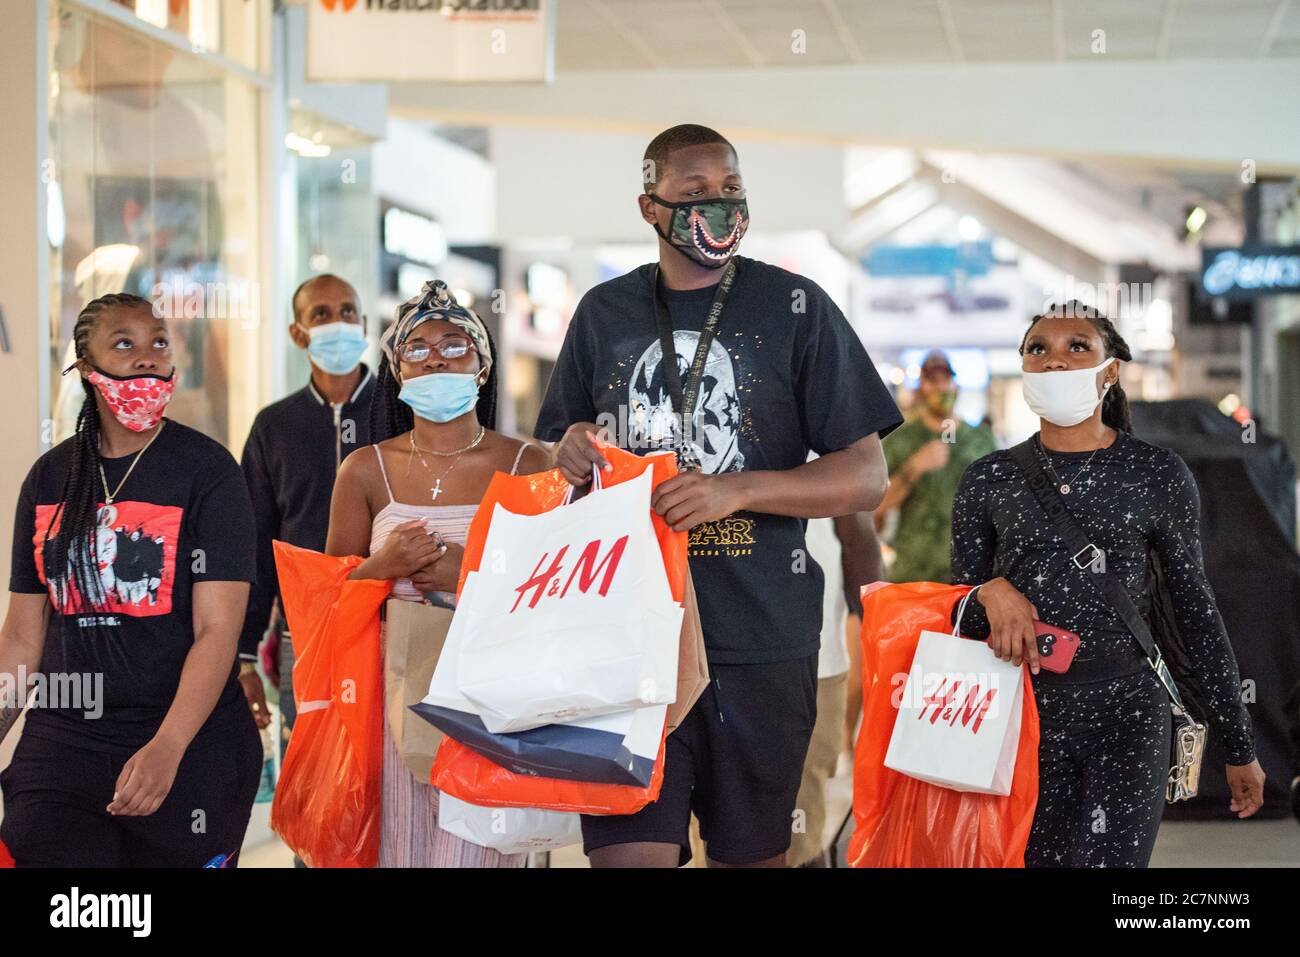 Sunrise, Florida, USA. 18th July, 2020. People shop at Sawgrass Mills Mall in Florida despite record high number of new Covid-19 cases in the state this week Credit: Orit Ben-Ezzer/ZUMA Wire/Alamy Live News Stock Photo